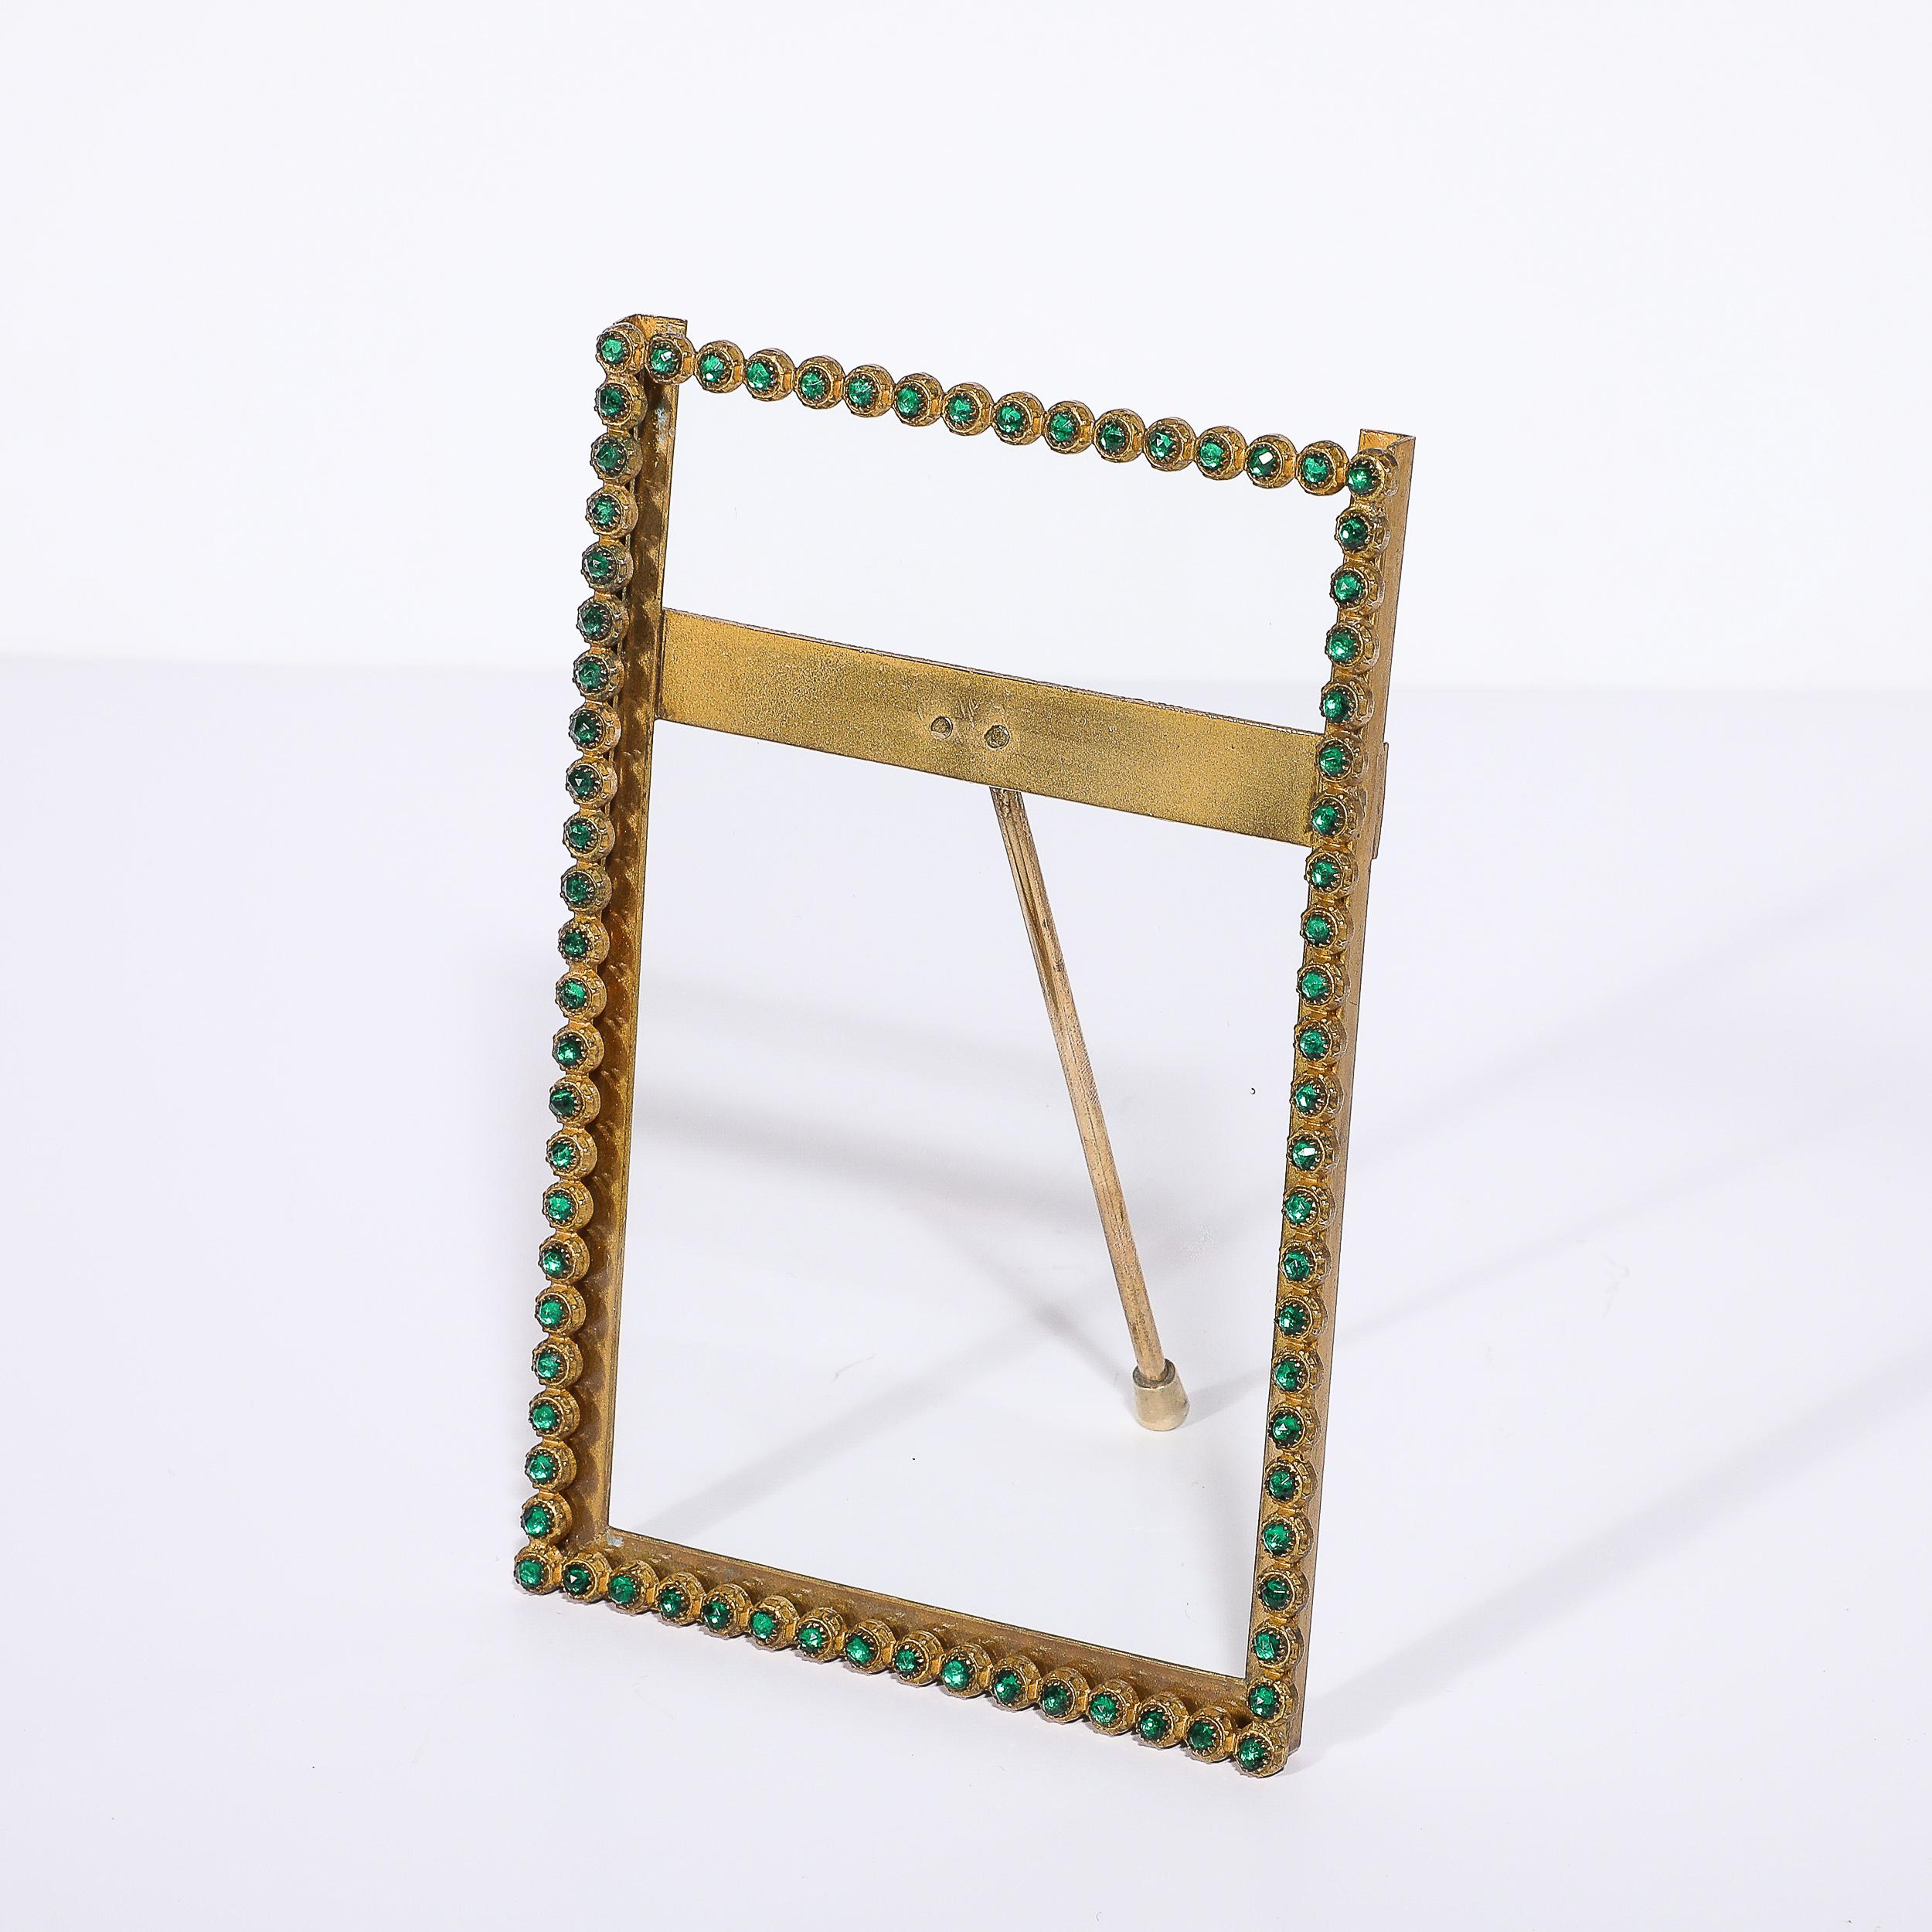 This well adorned and finely crafted Arts and Crafts Movement Green Gemstone Encrusted Picture Frame originates from France, Circa 1920. Featuring a lovely brass border with rounded settings containing green gemstones, glittering with an elegant